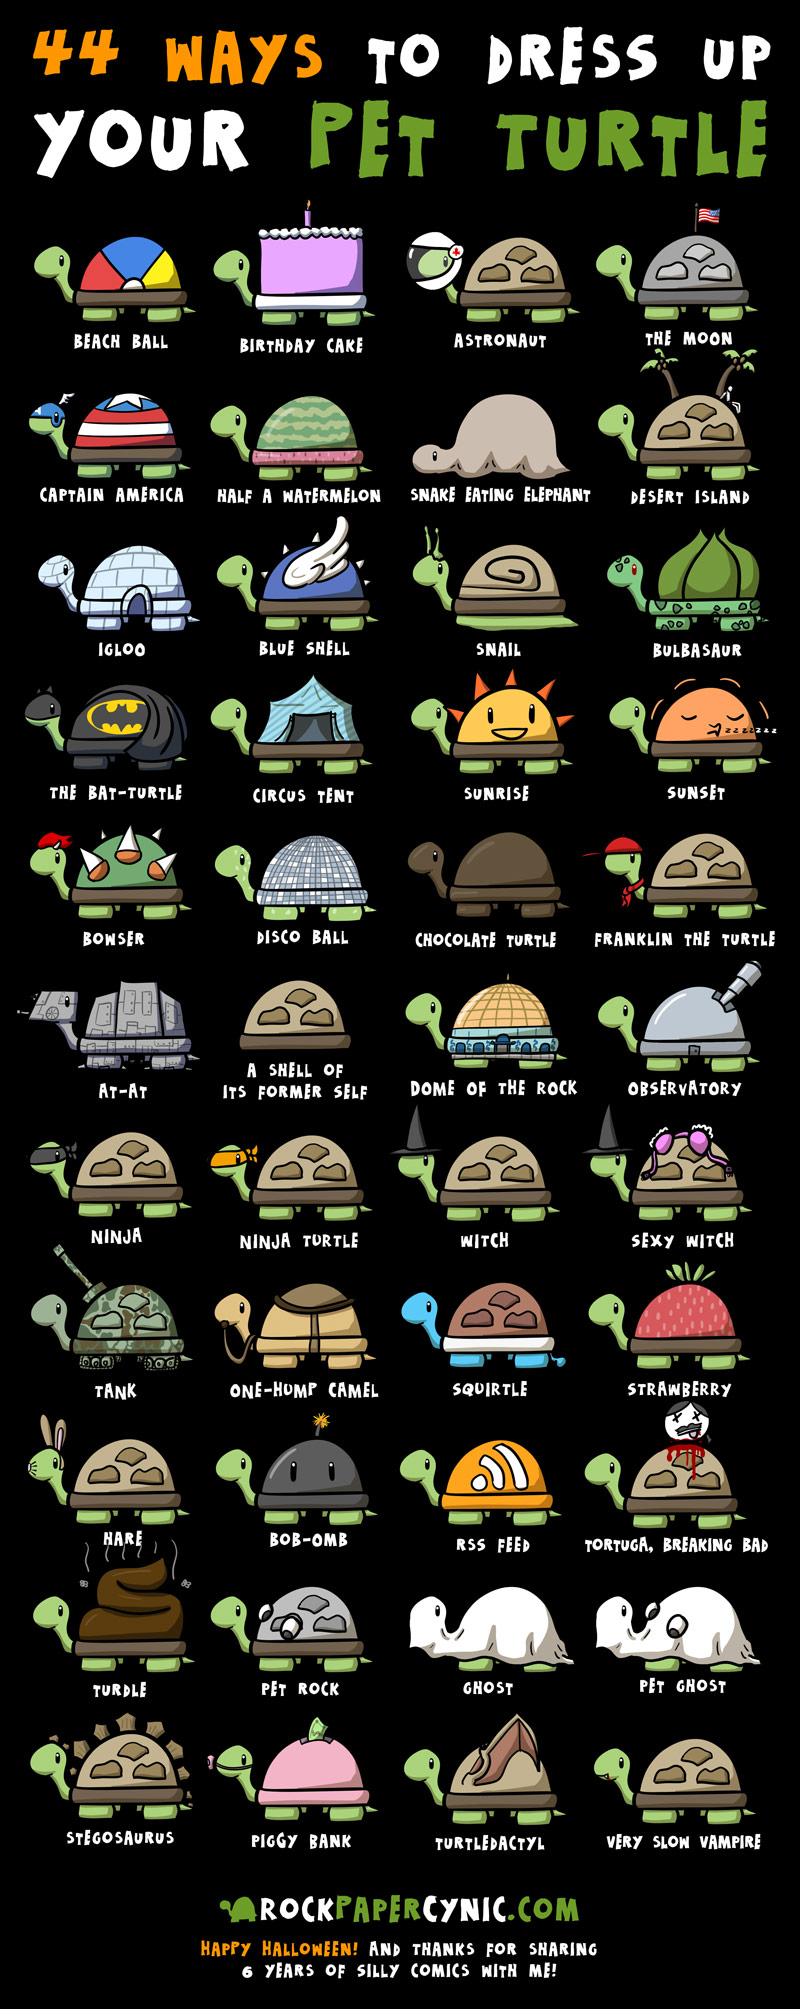 44 costume ideas for your pet turtle